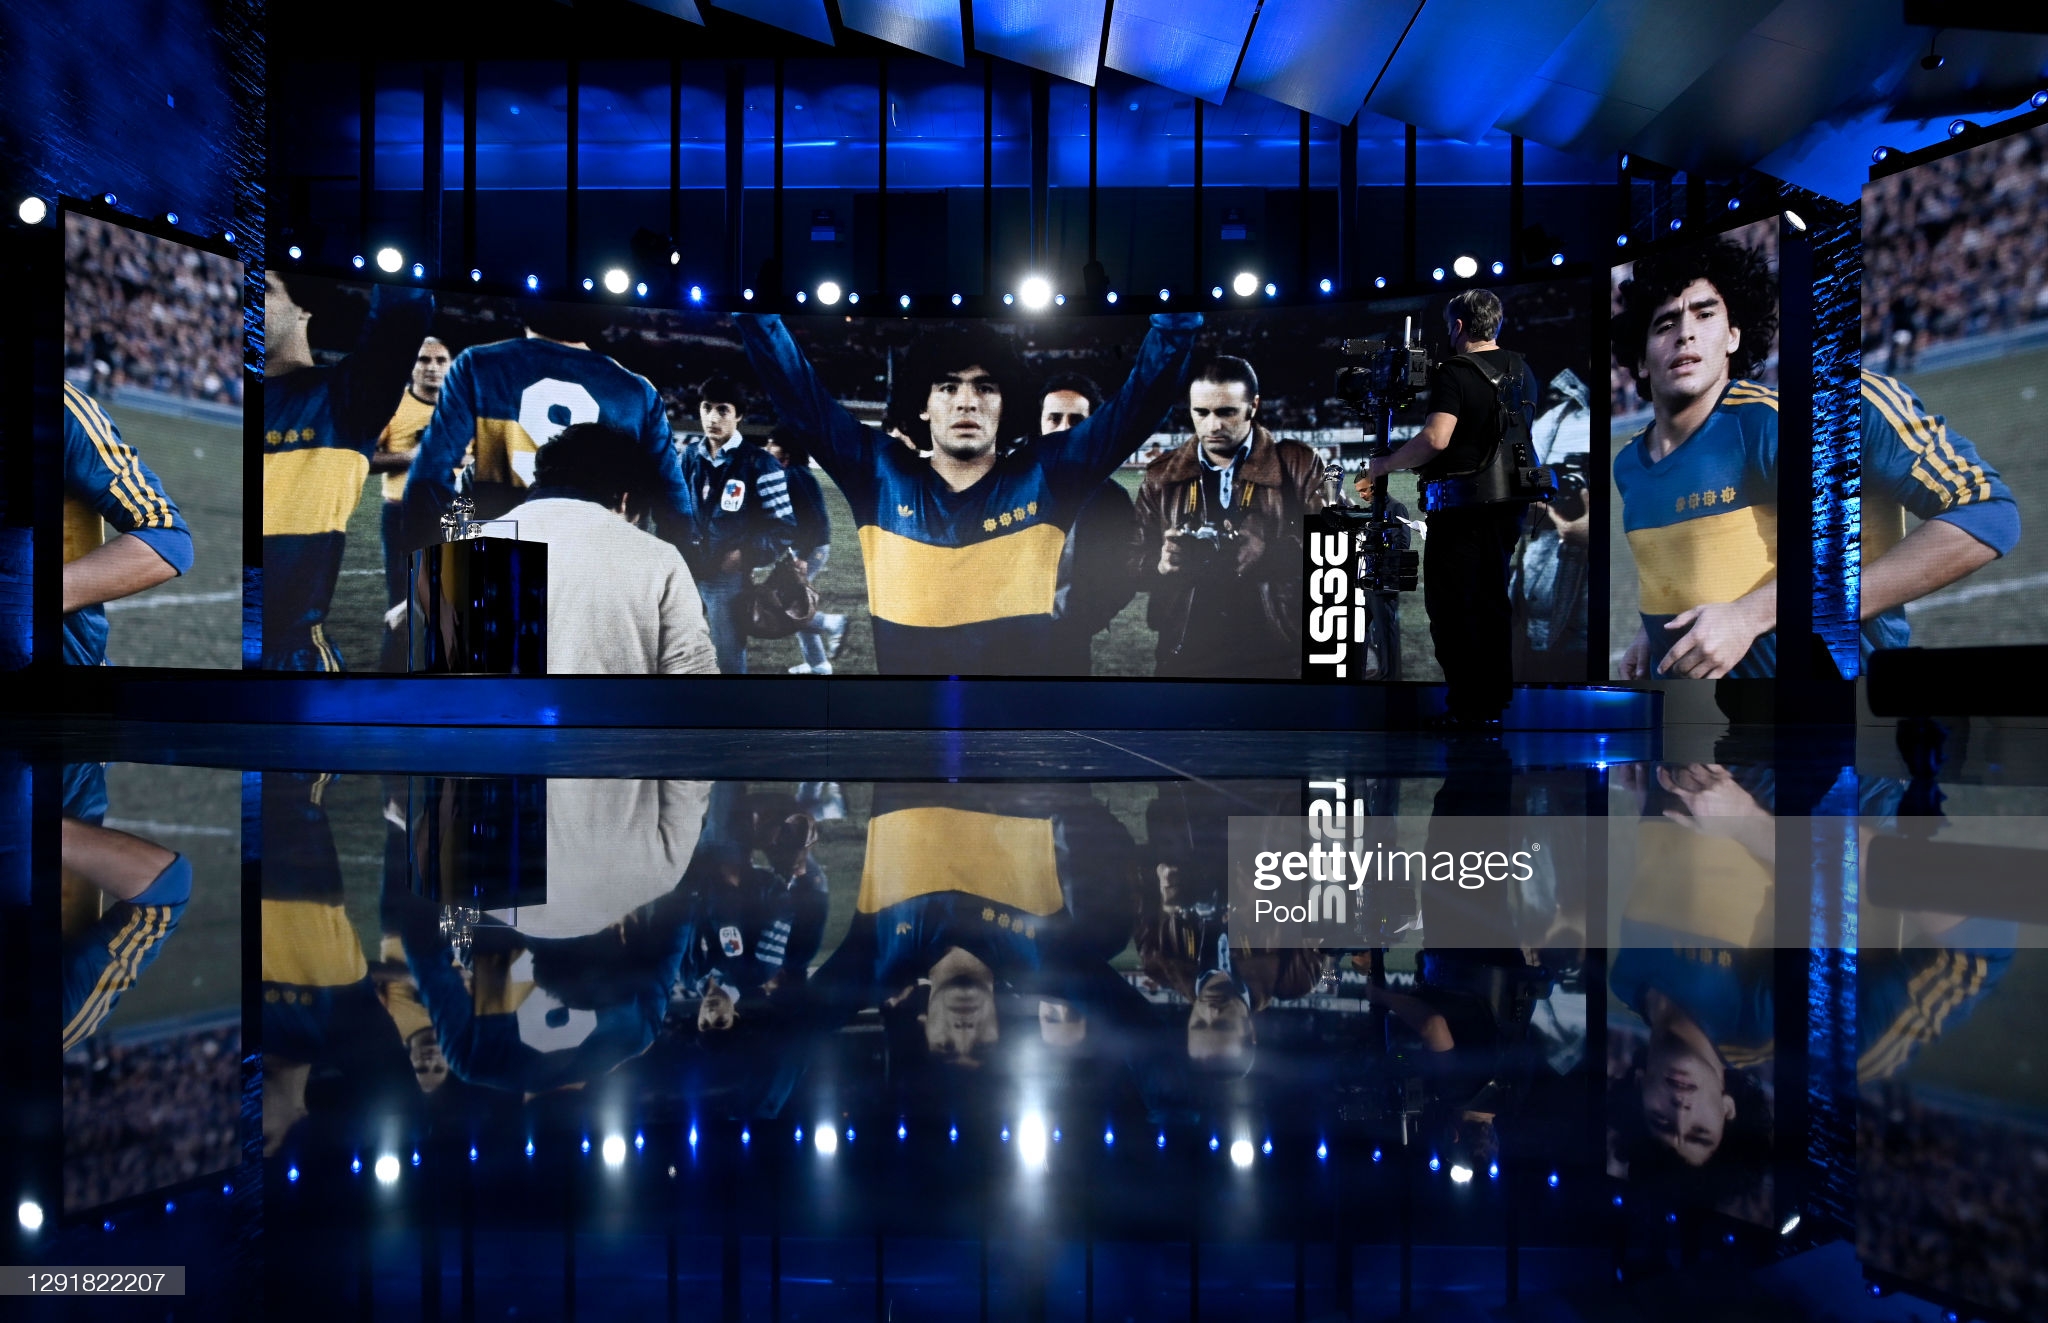 gettyimages-1291822207-2048x2048.jpg